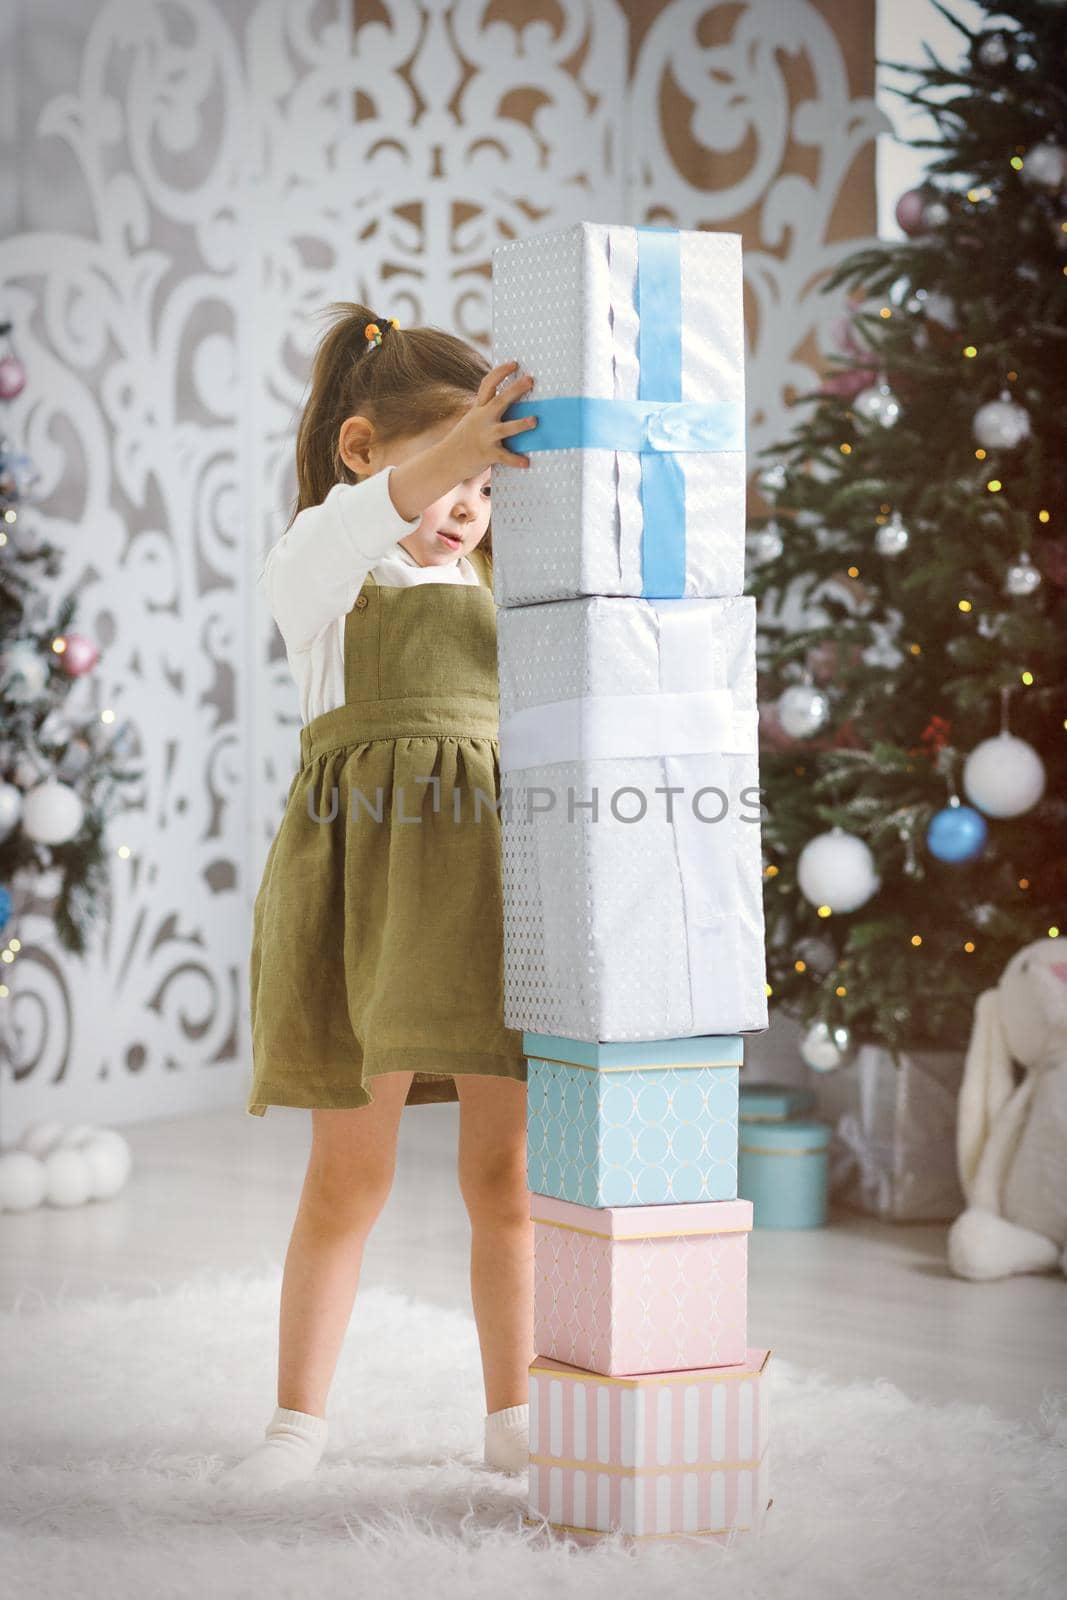 Little girl builds a tower of New Year's gifts in the living room with a Christmas tree.